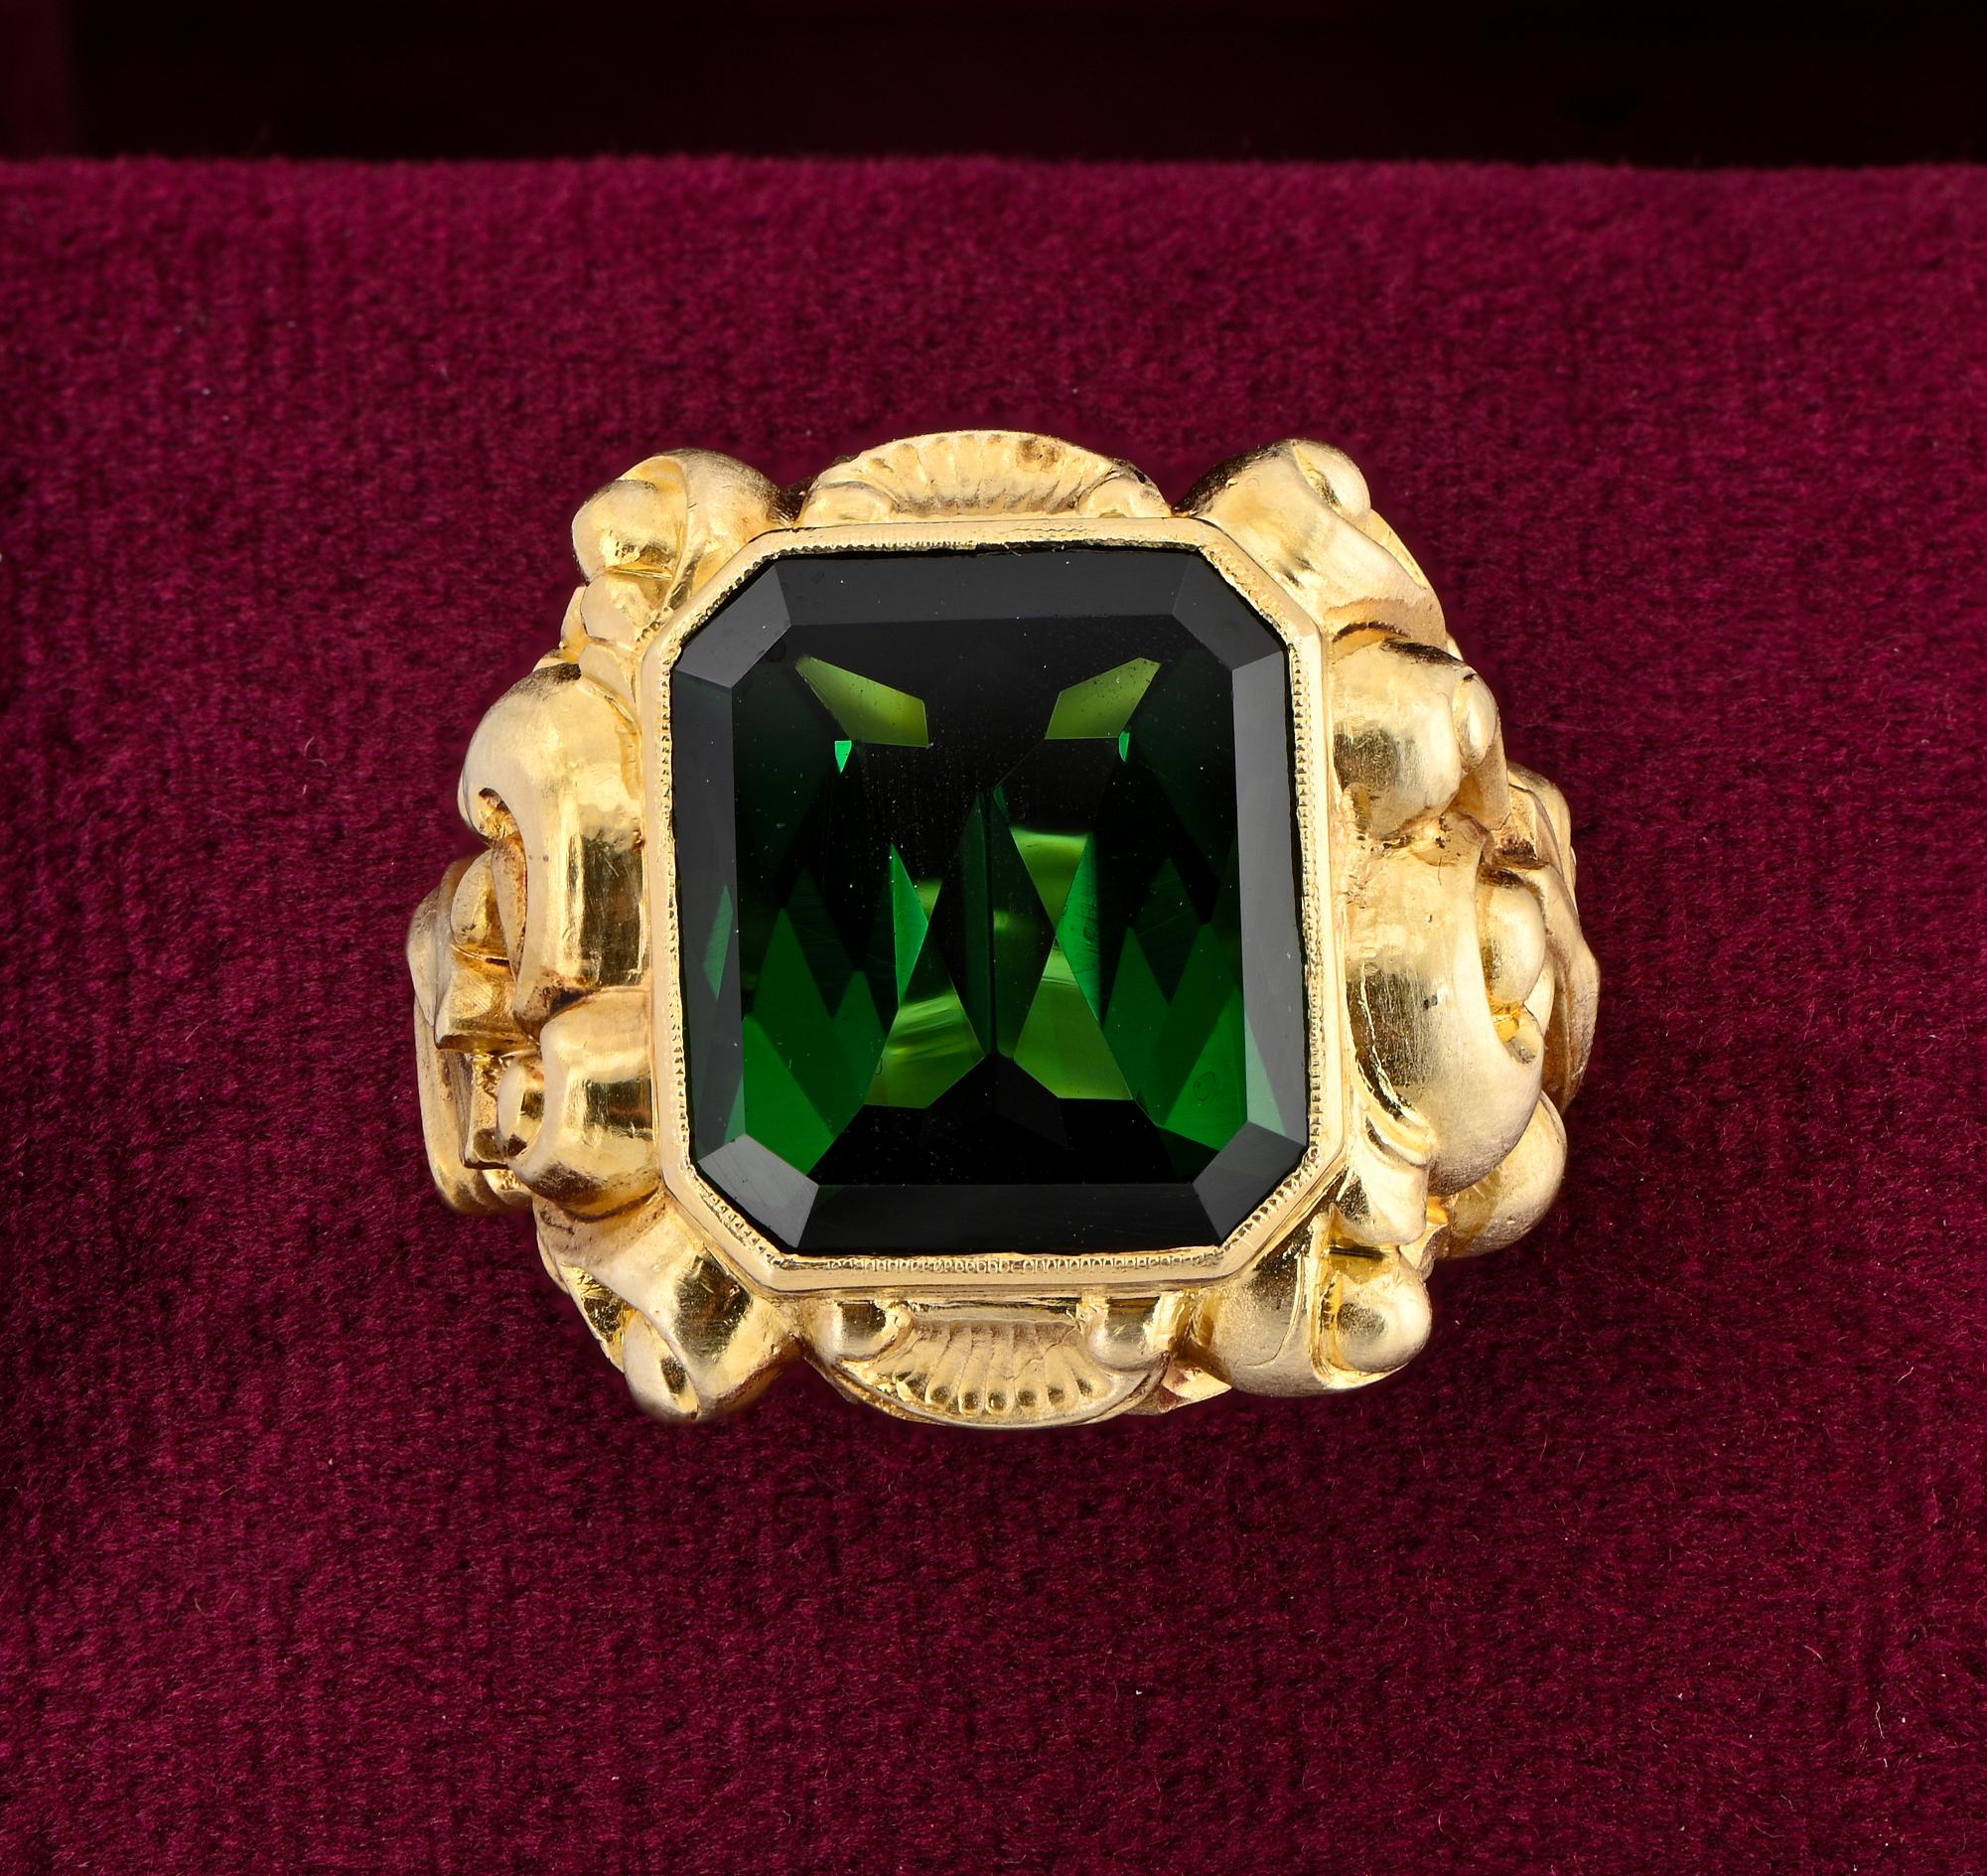 This outstanding antique ring is a late Victorian period, 1890/1900 ca
Hand crafted in sumptuous 16th Century Baroque style as eclecticism of the Victorian era
It has an amazing hand carved art work, deep scrolls, vegetable motifs and shells take